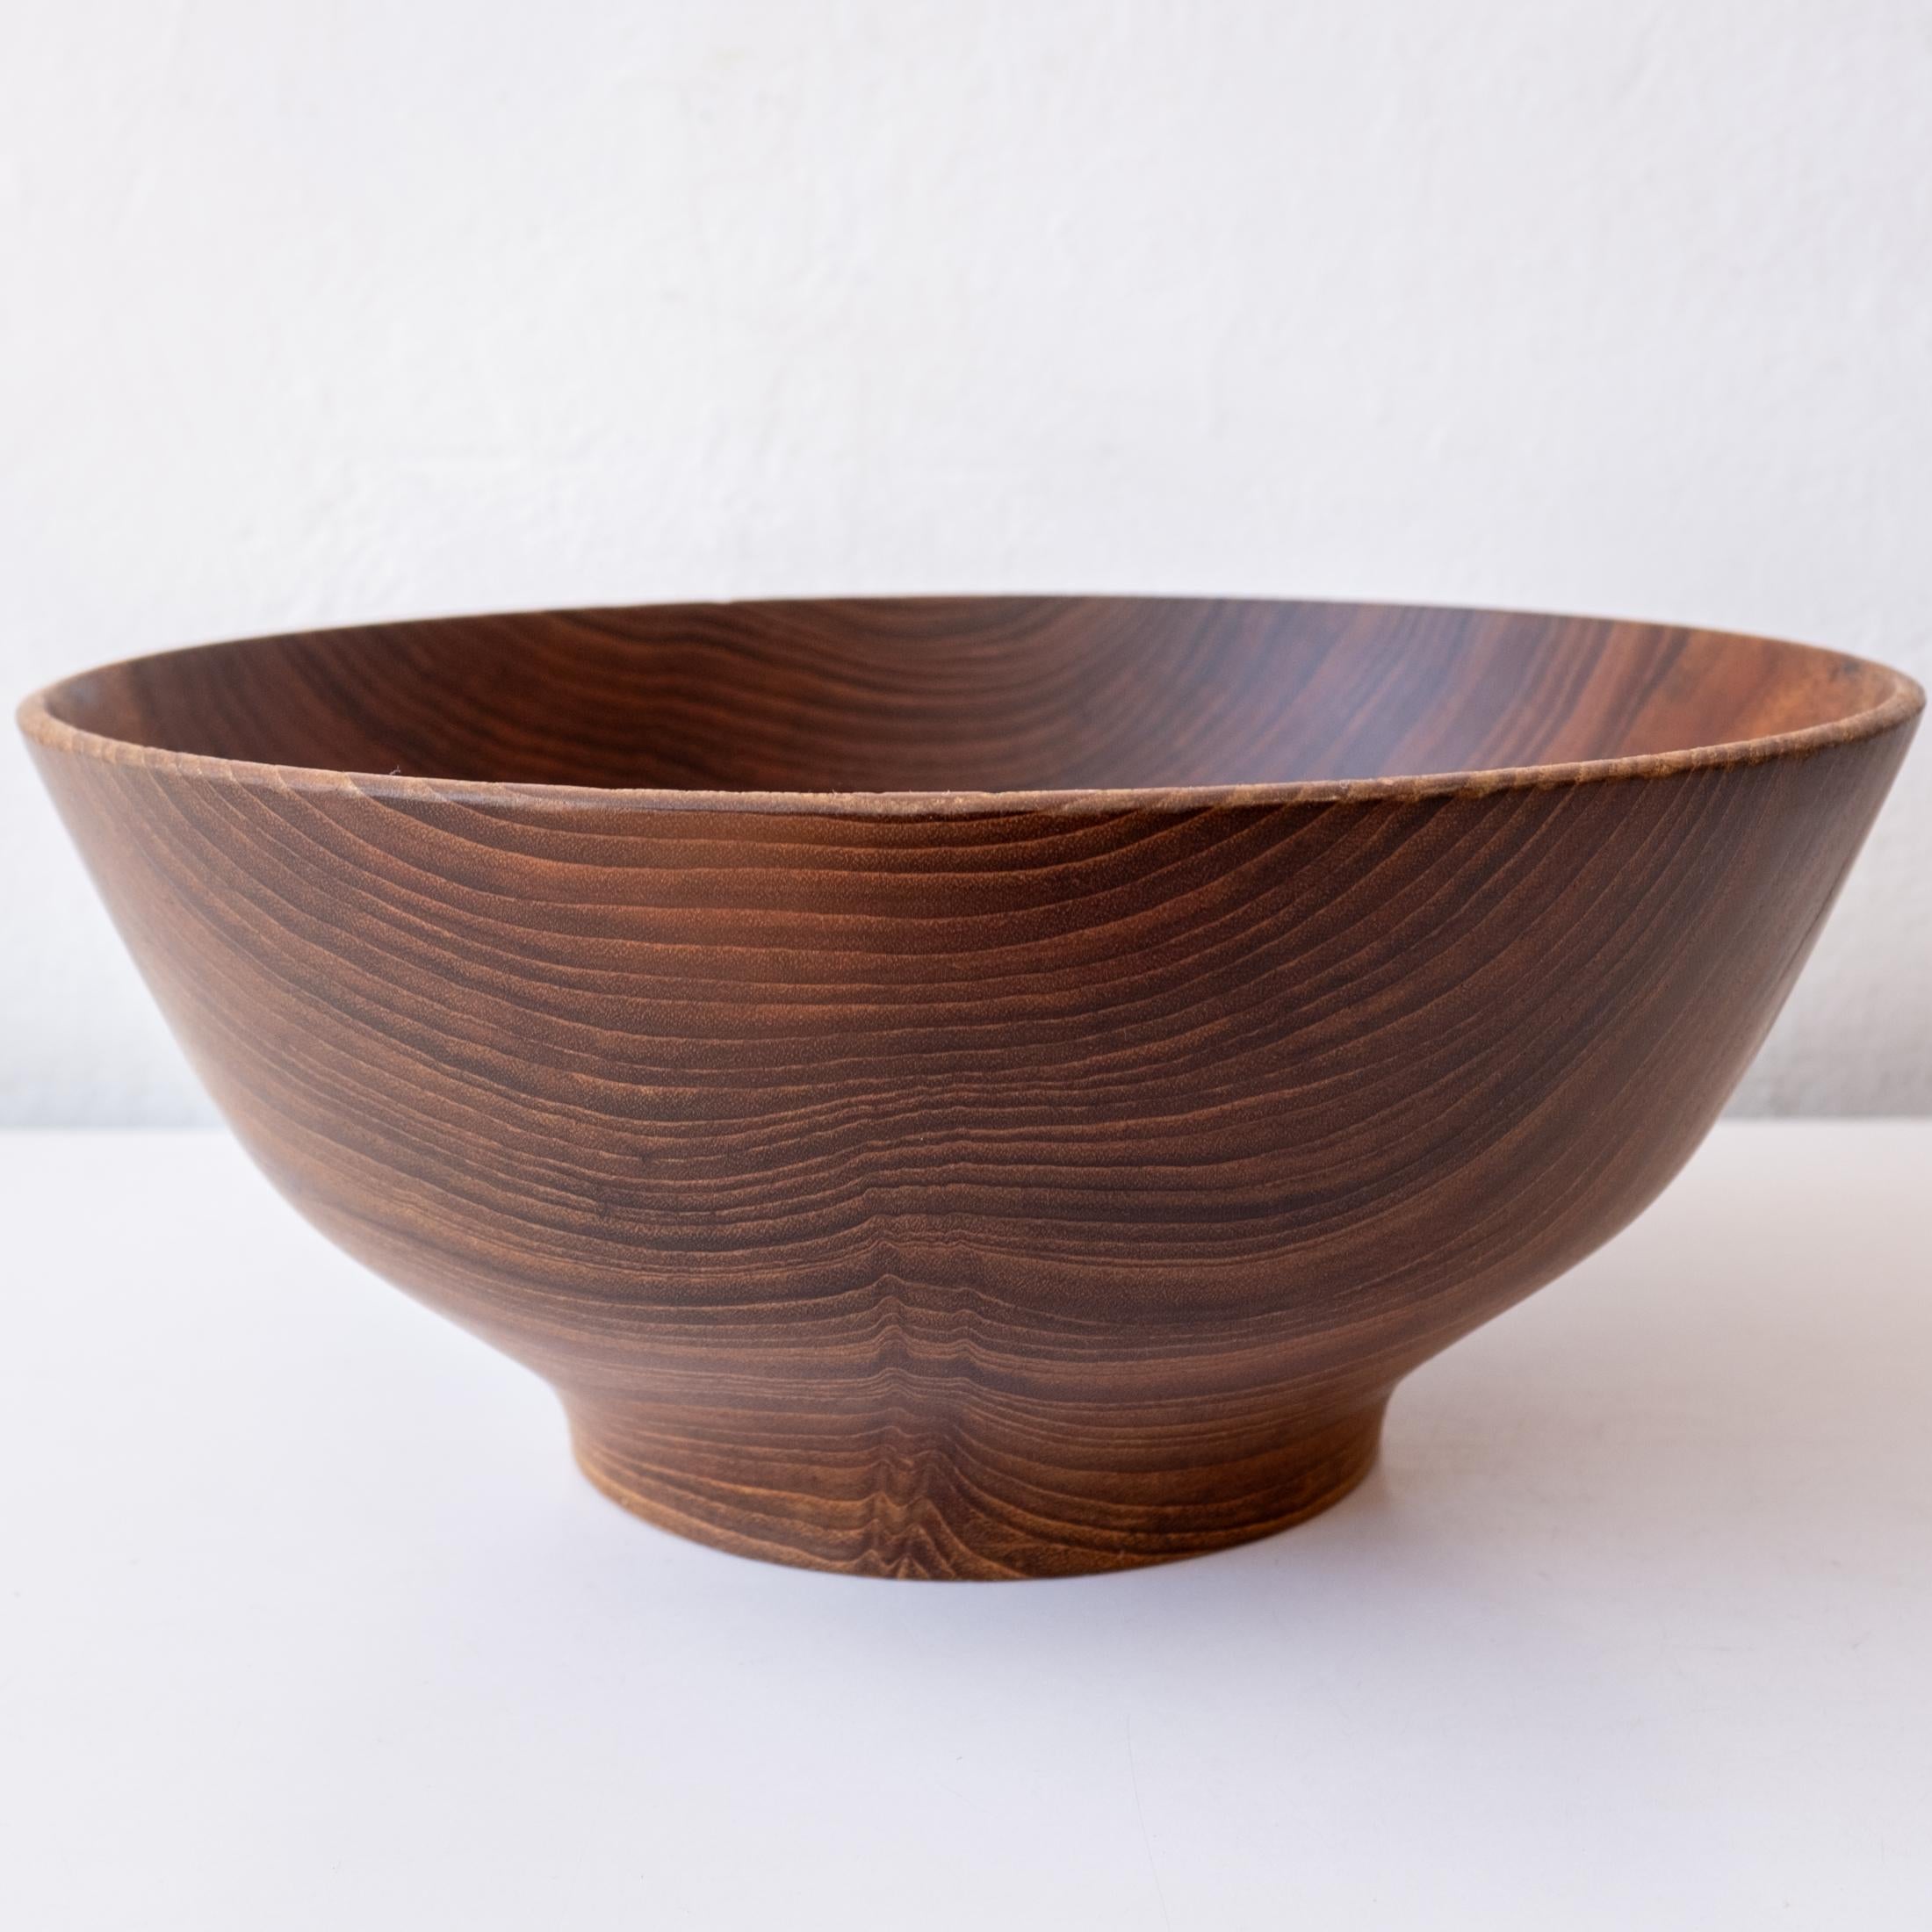 Studio Turned Teak Footed Bowl by Bob Stocksdale For Sale 4